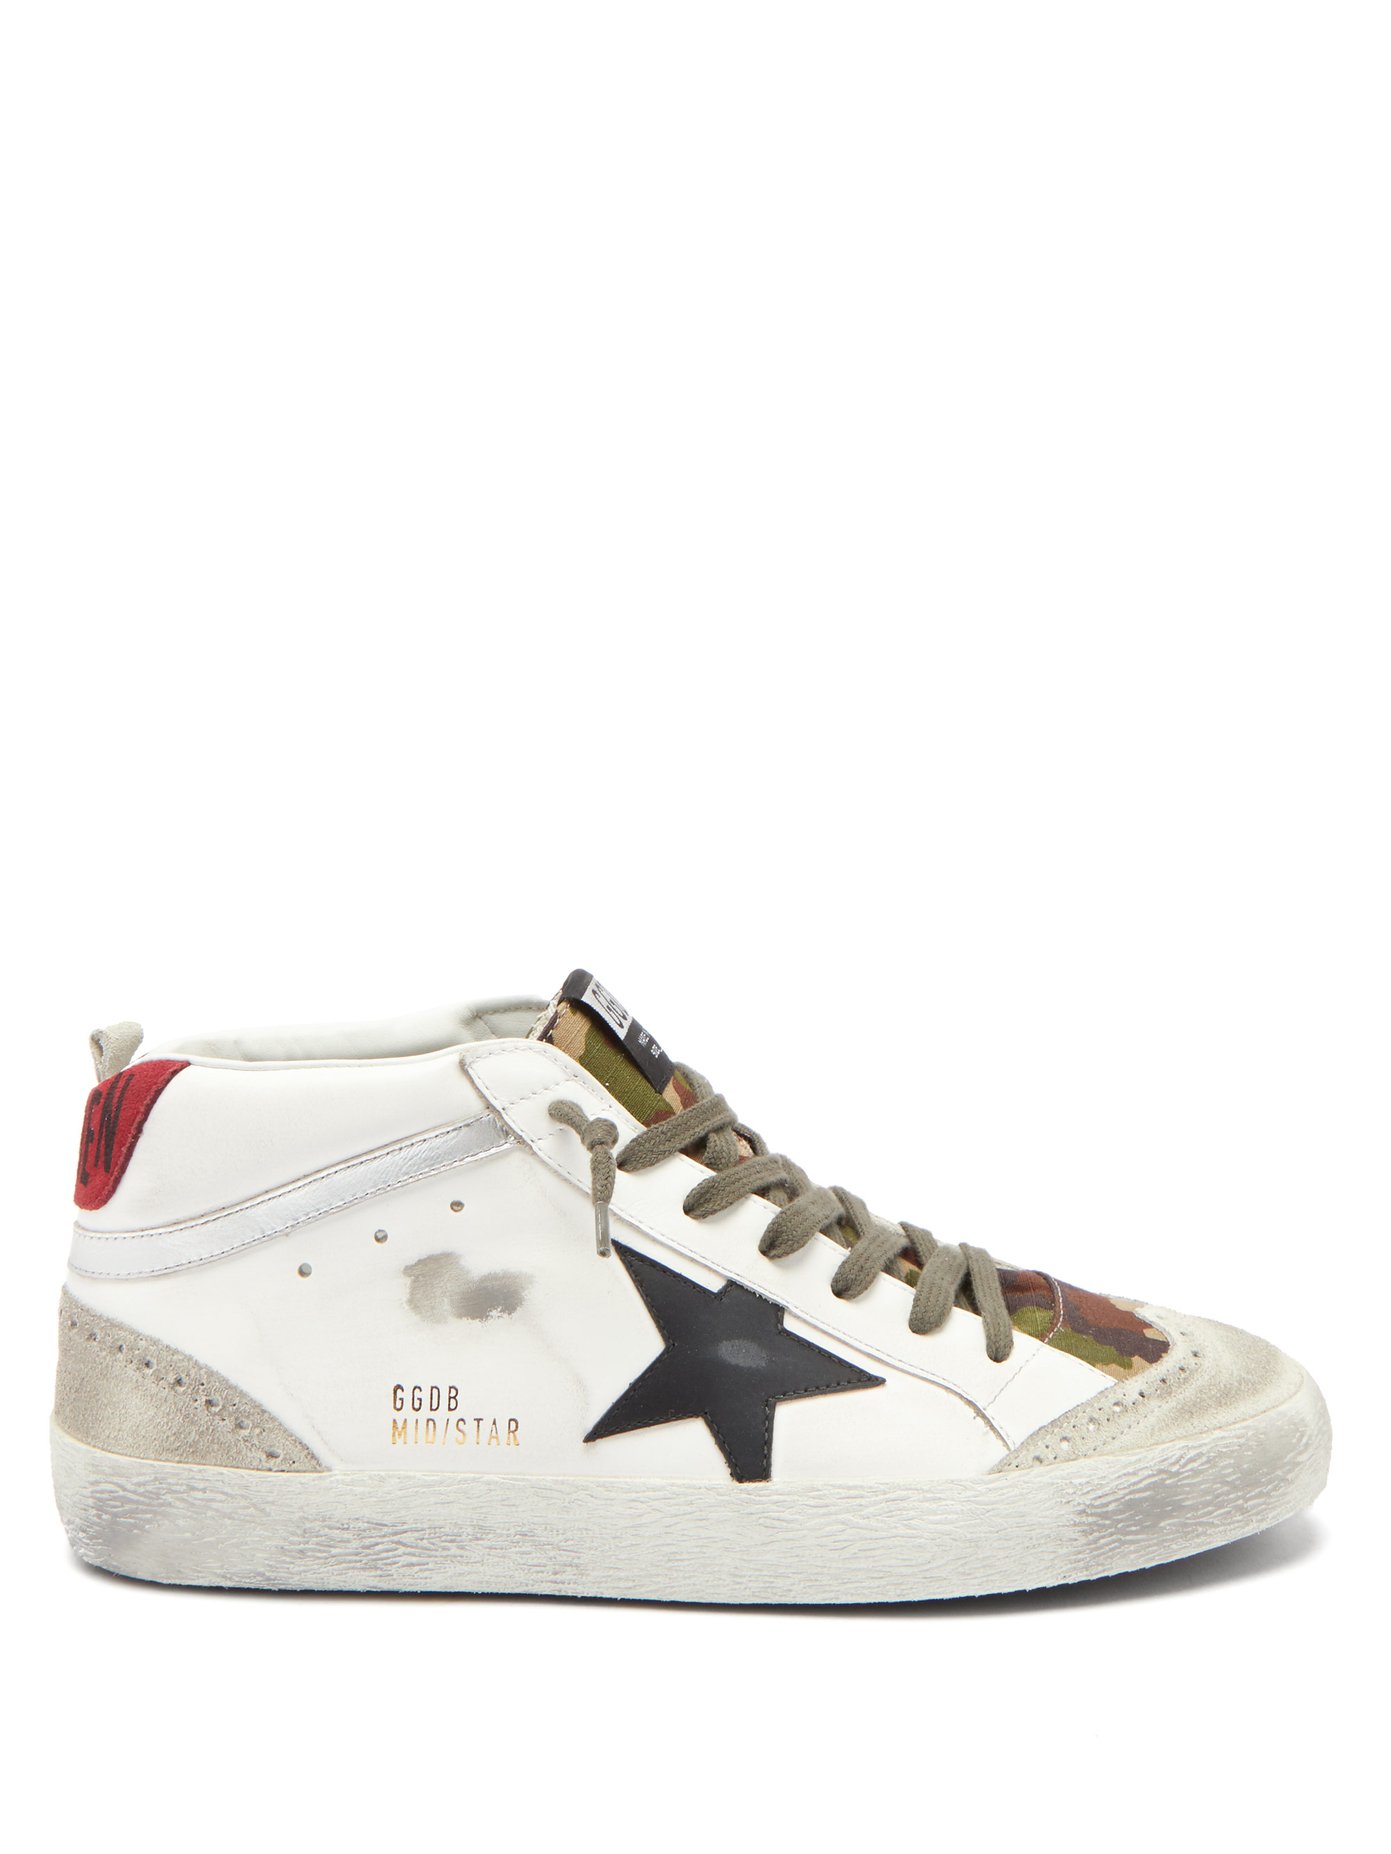 Hi Star leather trainers | Golden Goose 